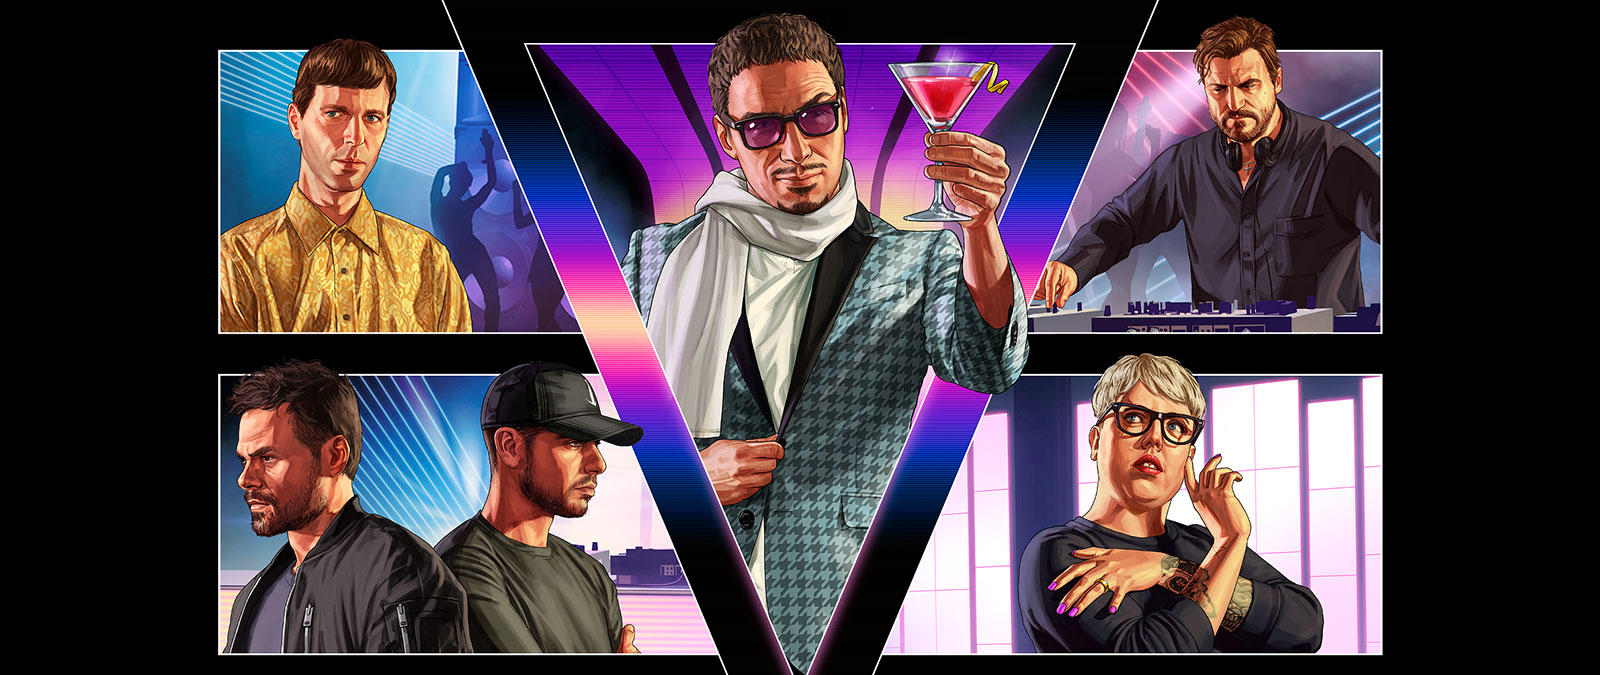 Grand Theft Auto Online After Hours, Collage of multiple characters in a nightclub.